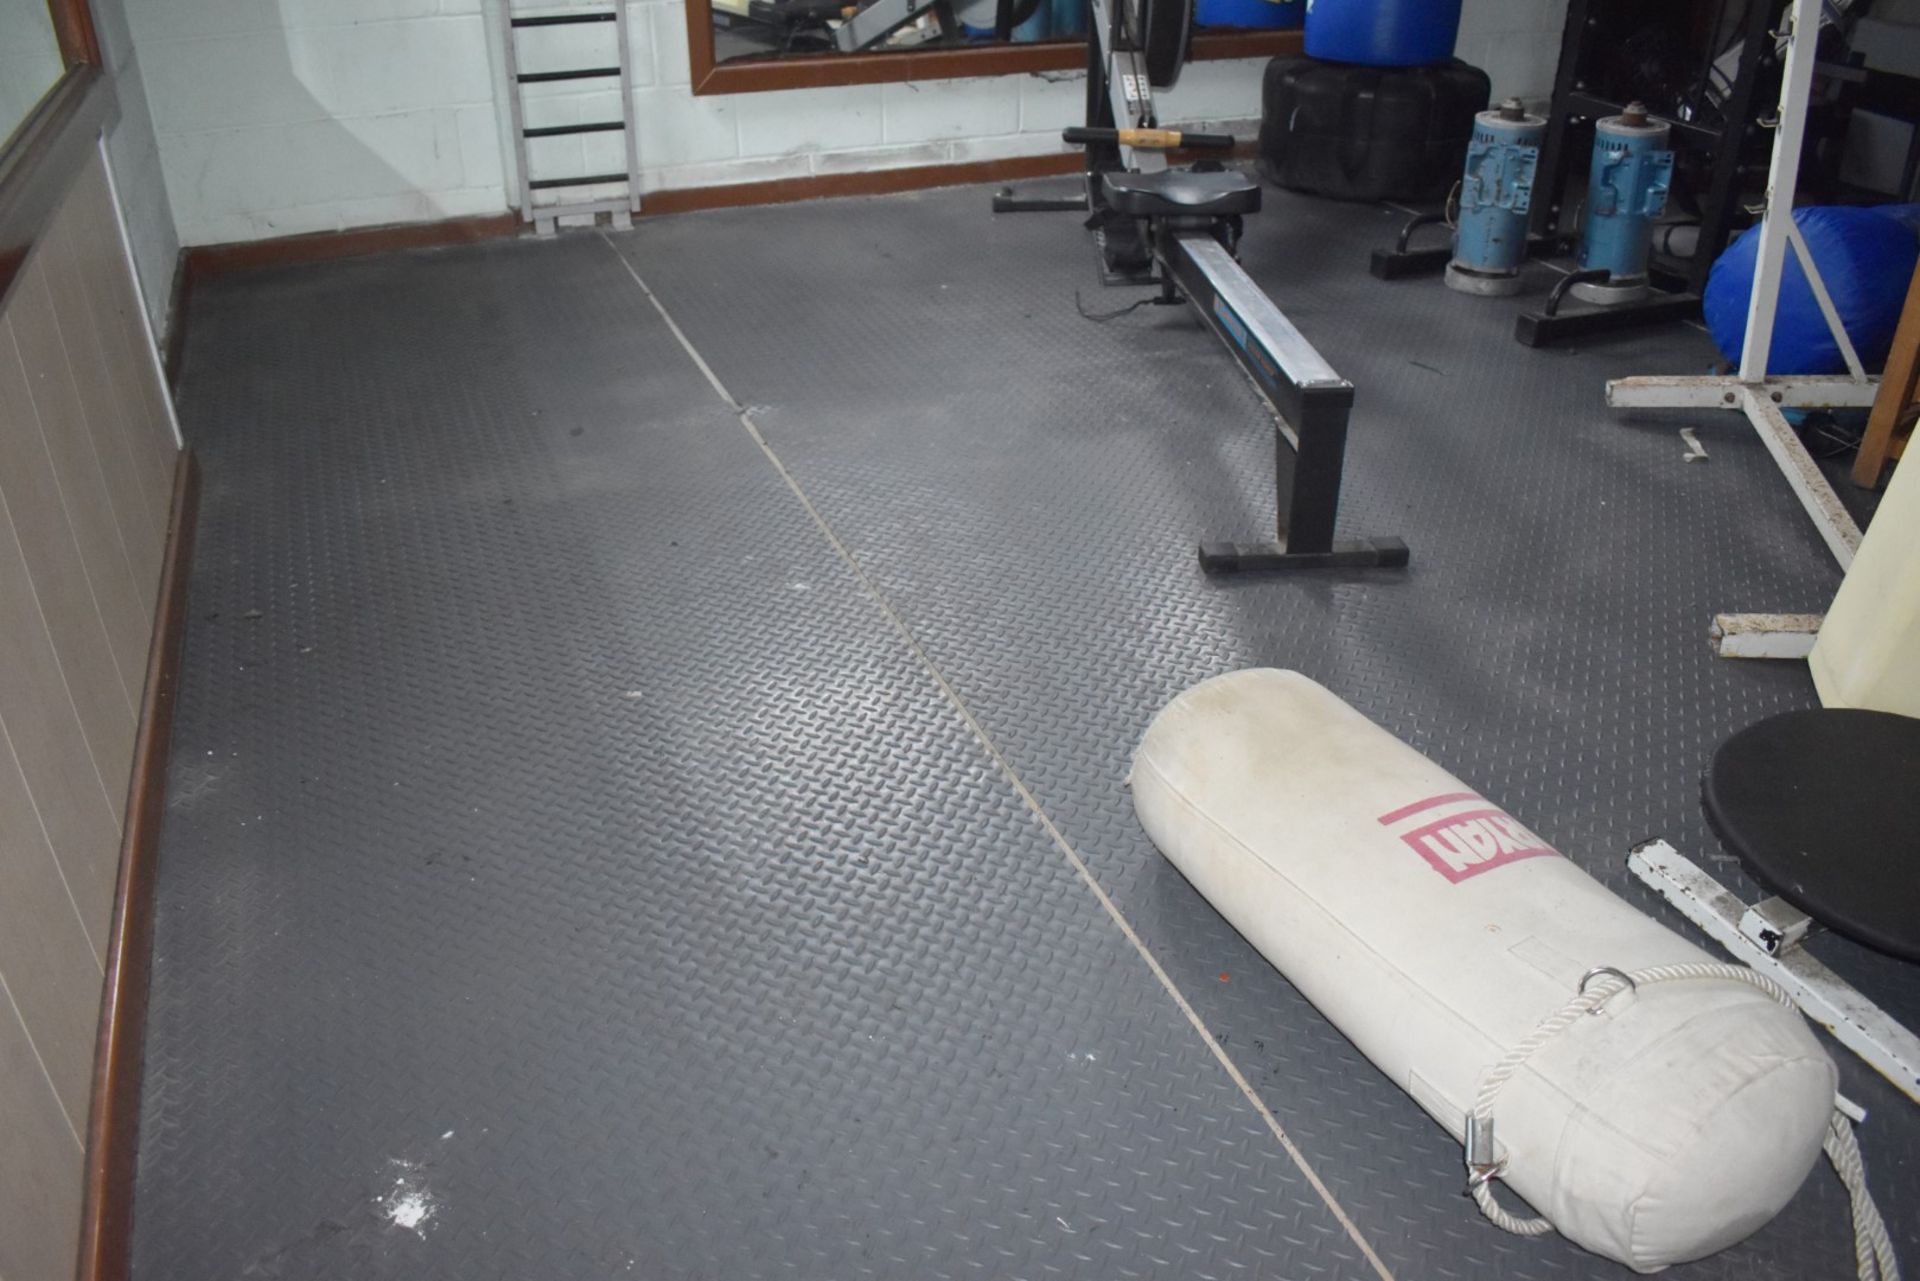 Contents of Bodybuilding and Strongman Gym - Includes Approx 30 Pieces of Gym Equipment, Floor Mats, - Image 89 of 95